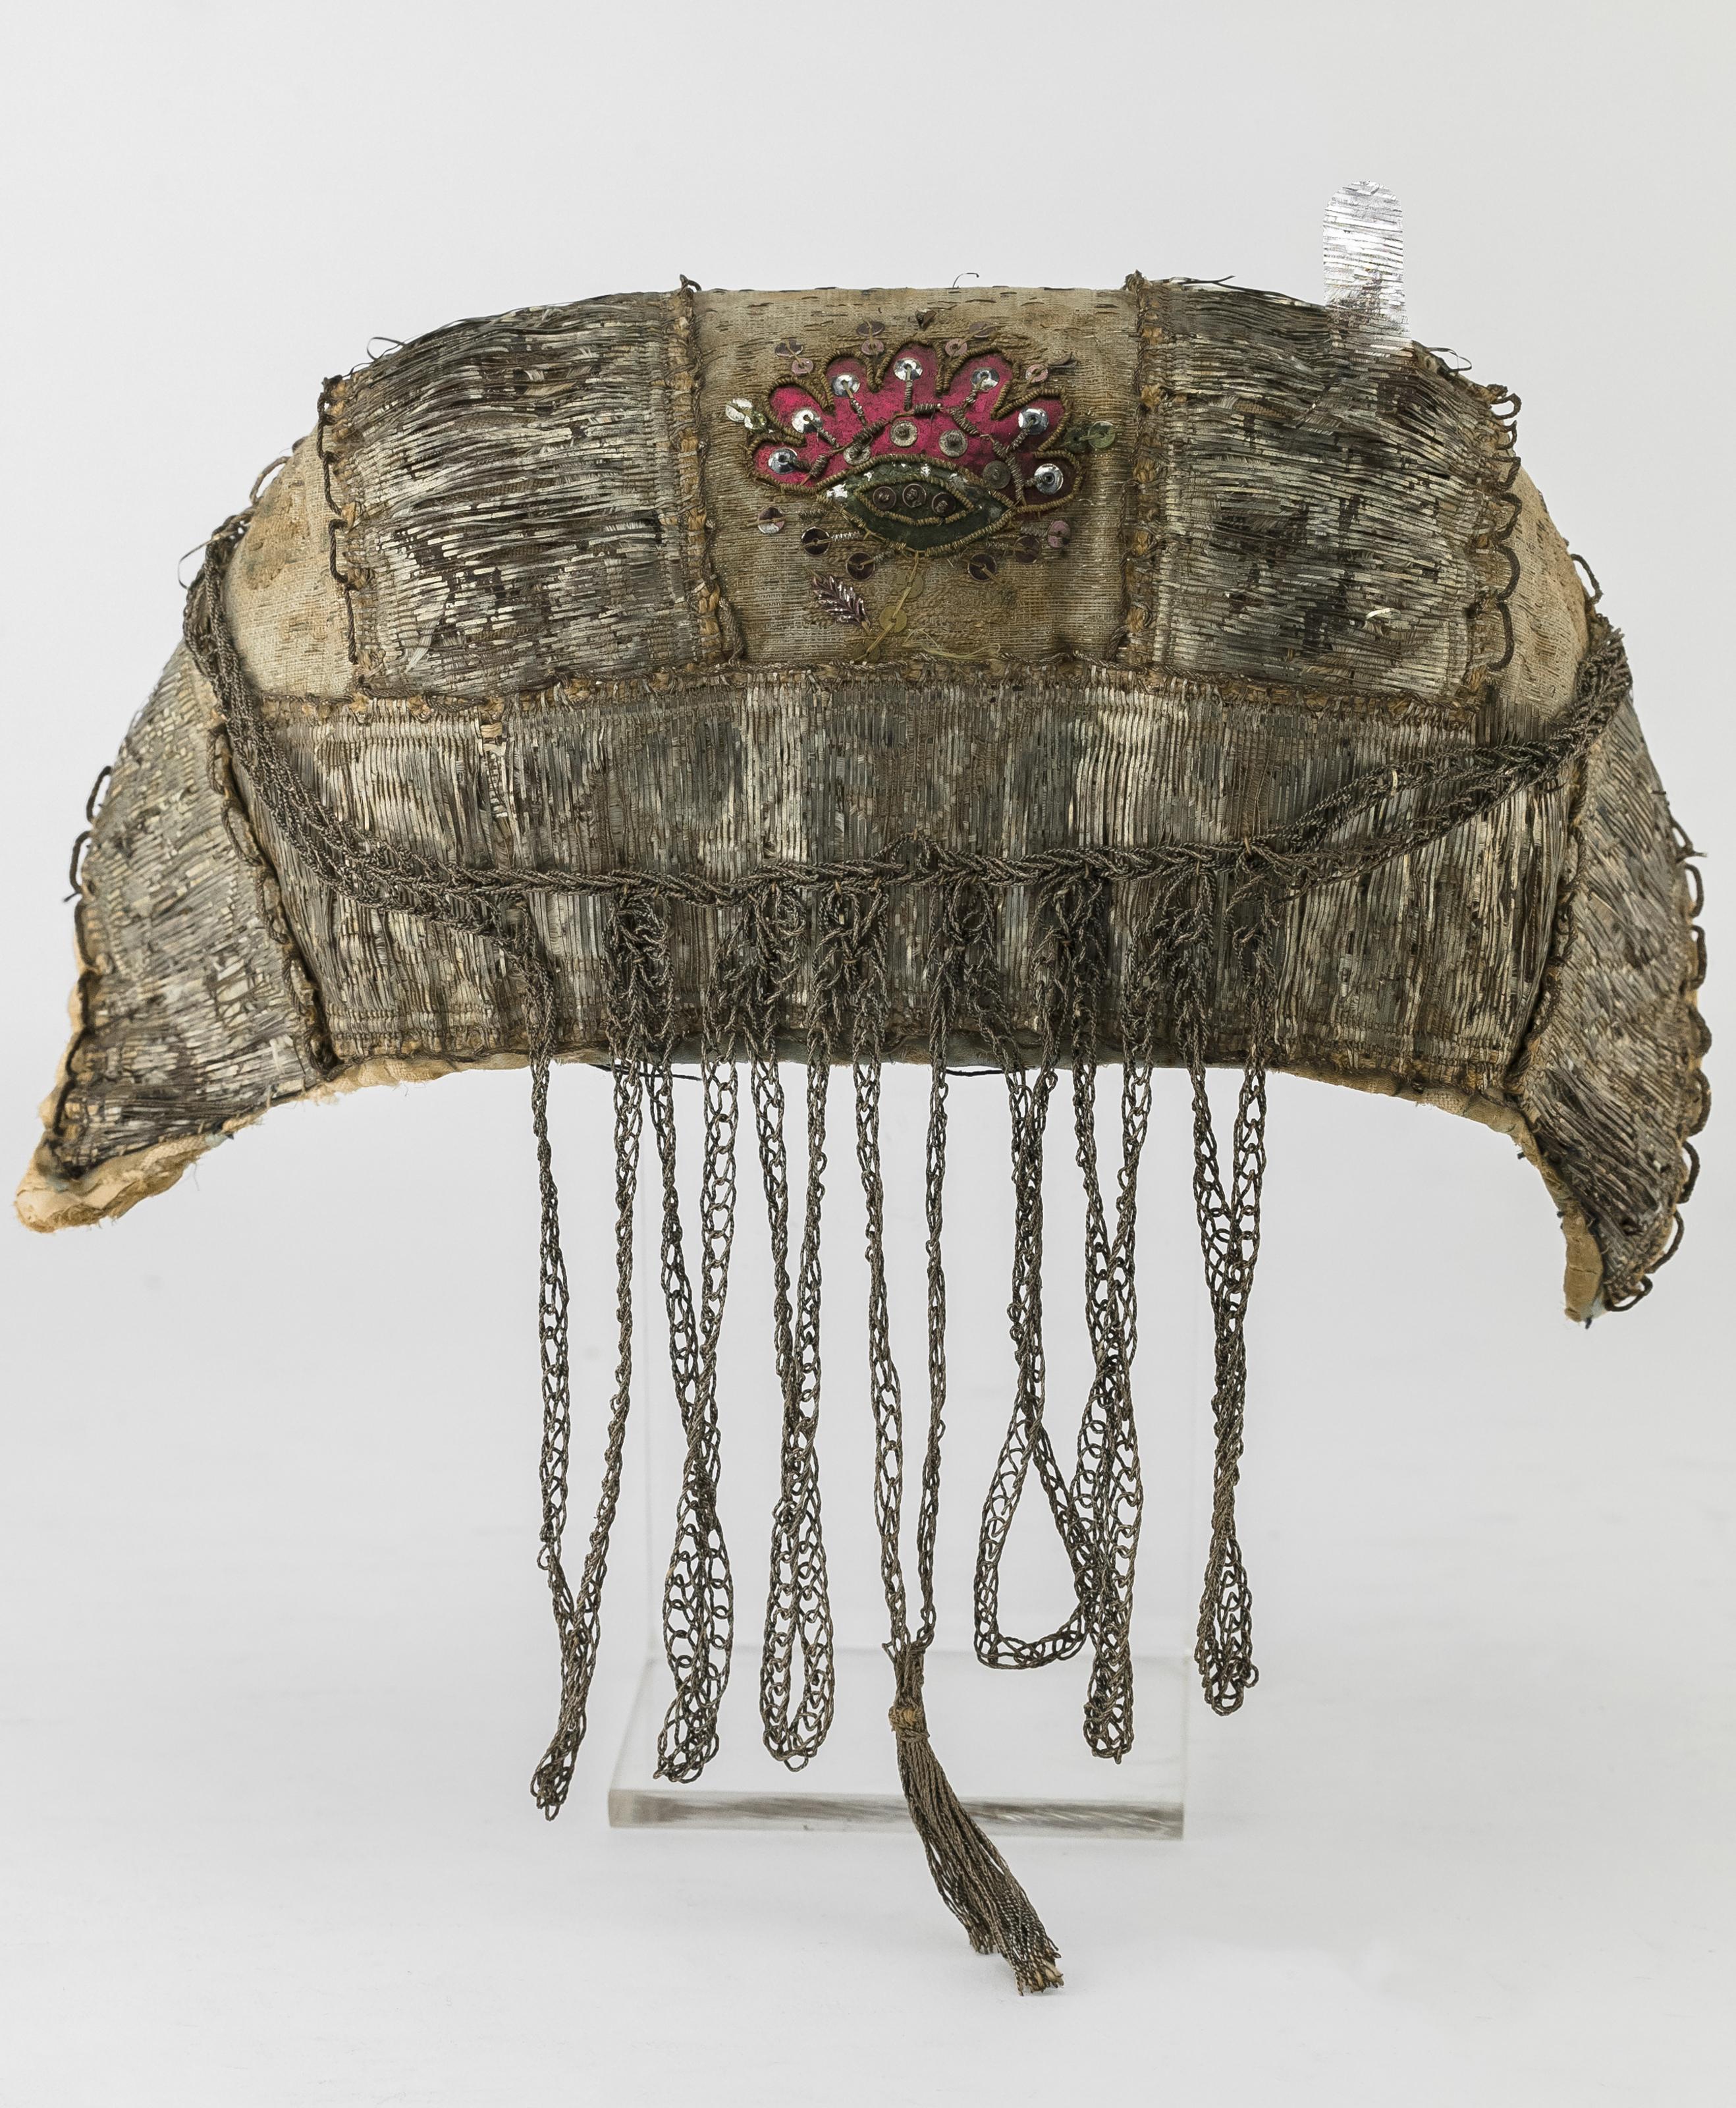 Gold and silver wrapped thread on canvas, gold thread embroidery, embellished with decorative appliques and sequins; silk lining.
Rare example of a magnificent cap worn on the Sabbath and holidays to cover the hair of a well-to-do married Jewish